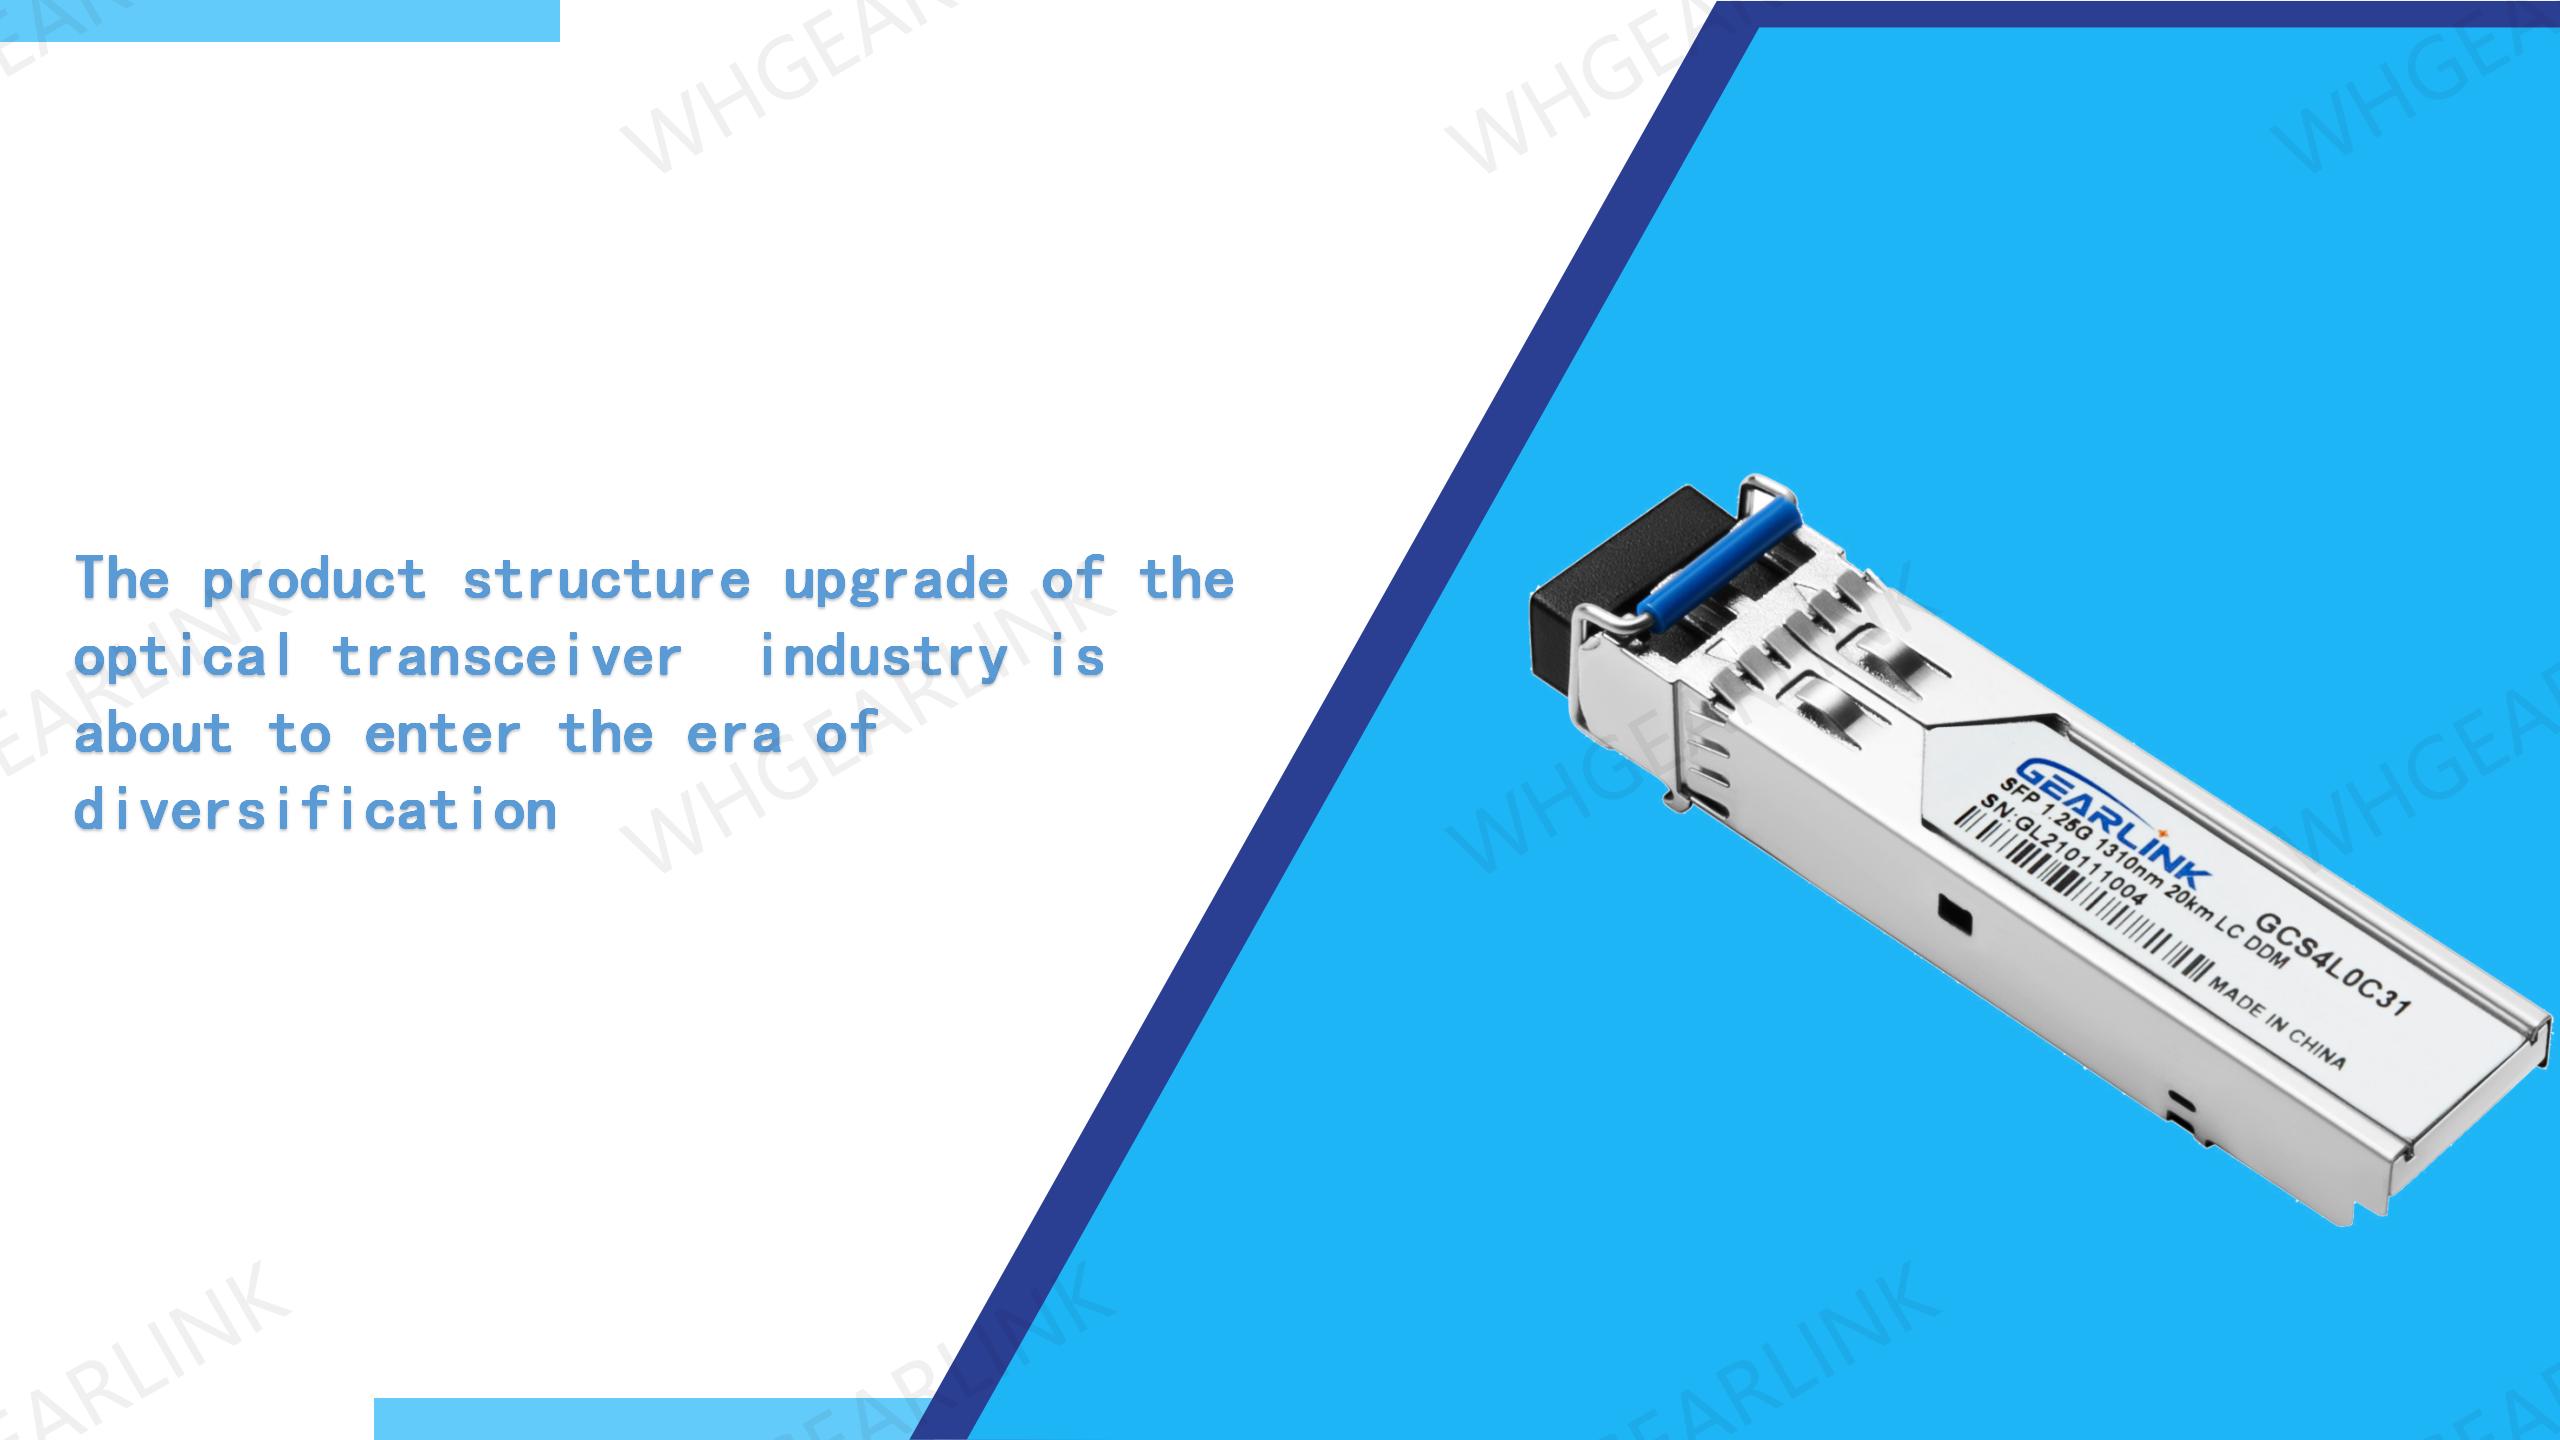 the-product-structure-upgrade-of-the-optical-transceiver-industry-is-about-to-enter-the-era-of-diversification.jpg